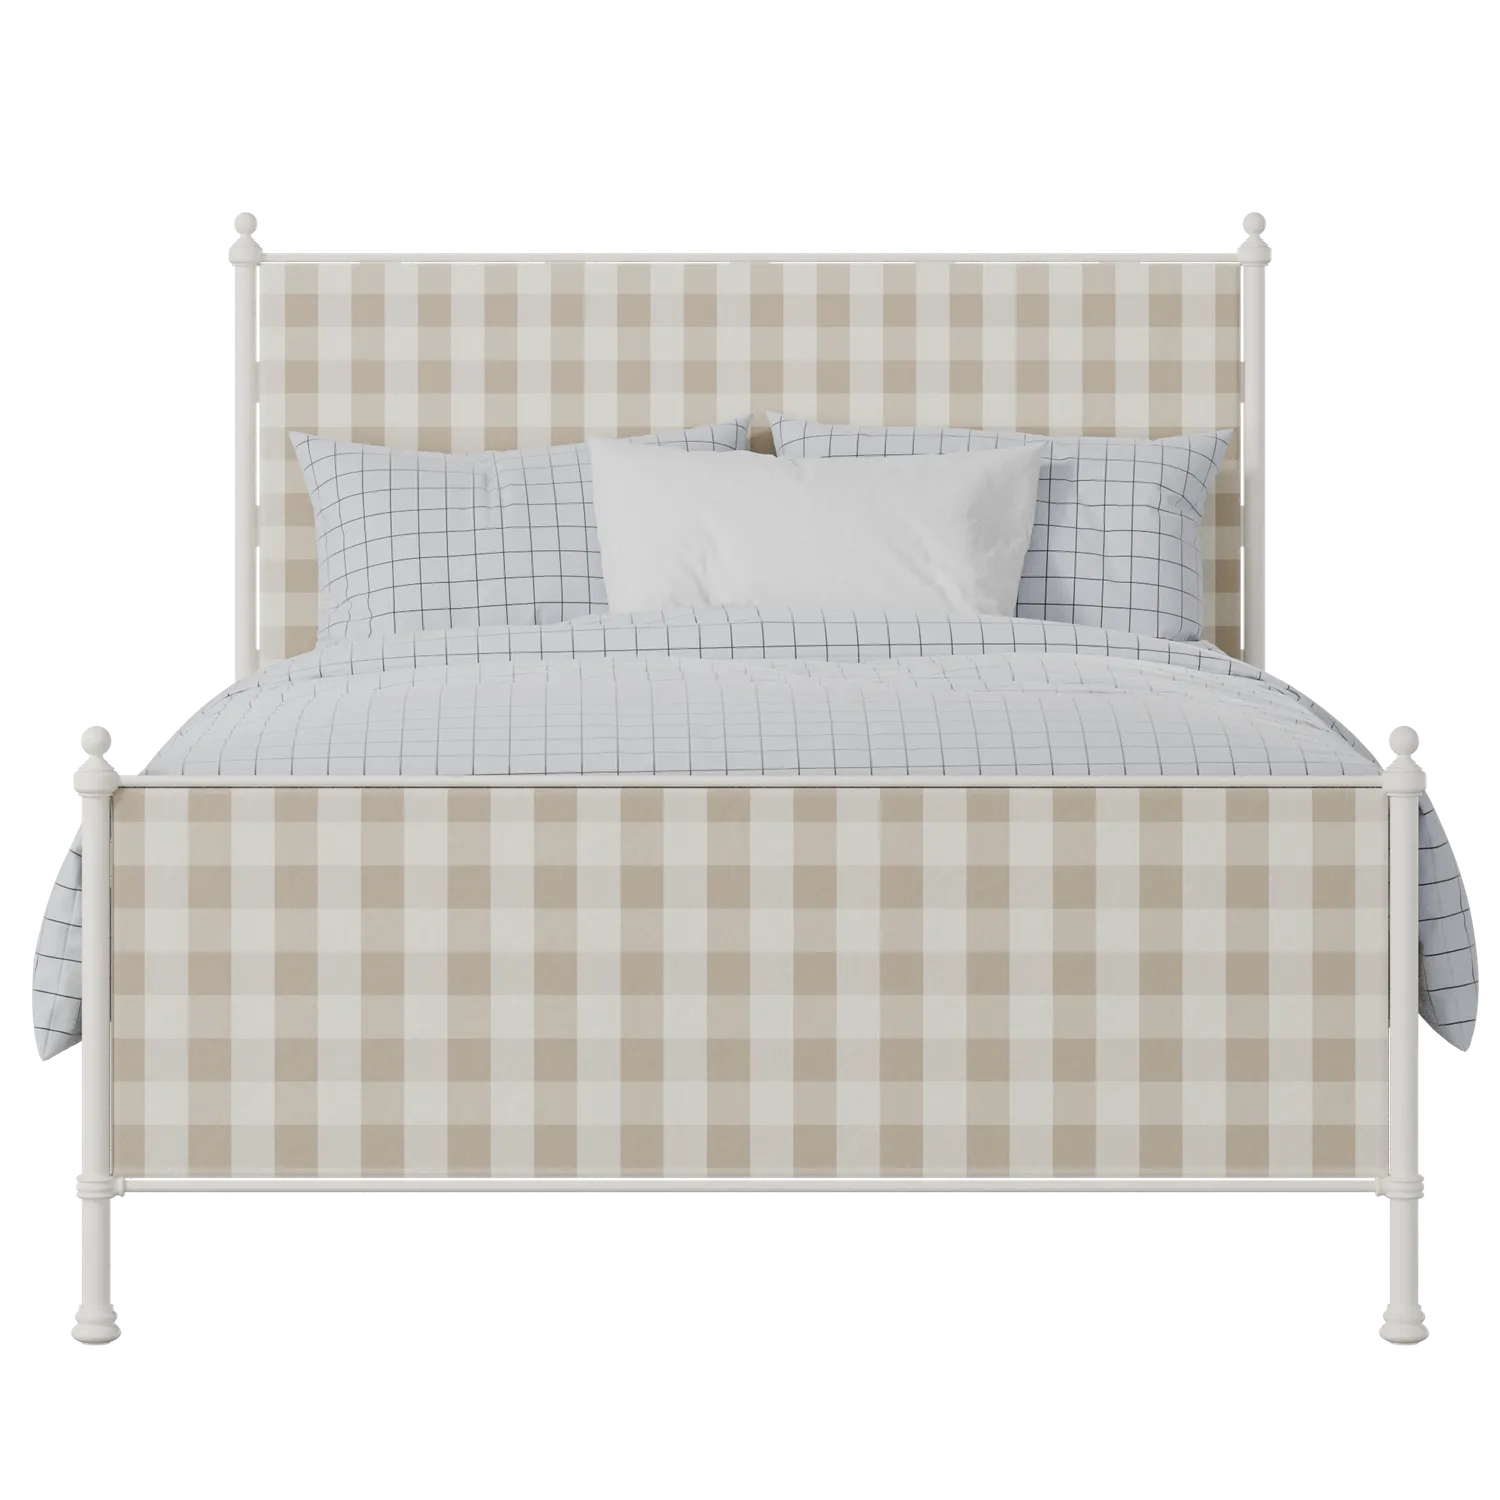 Neville iron/metal upholstered bed in ivory with grey fabric